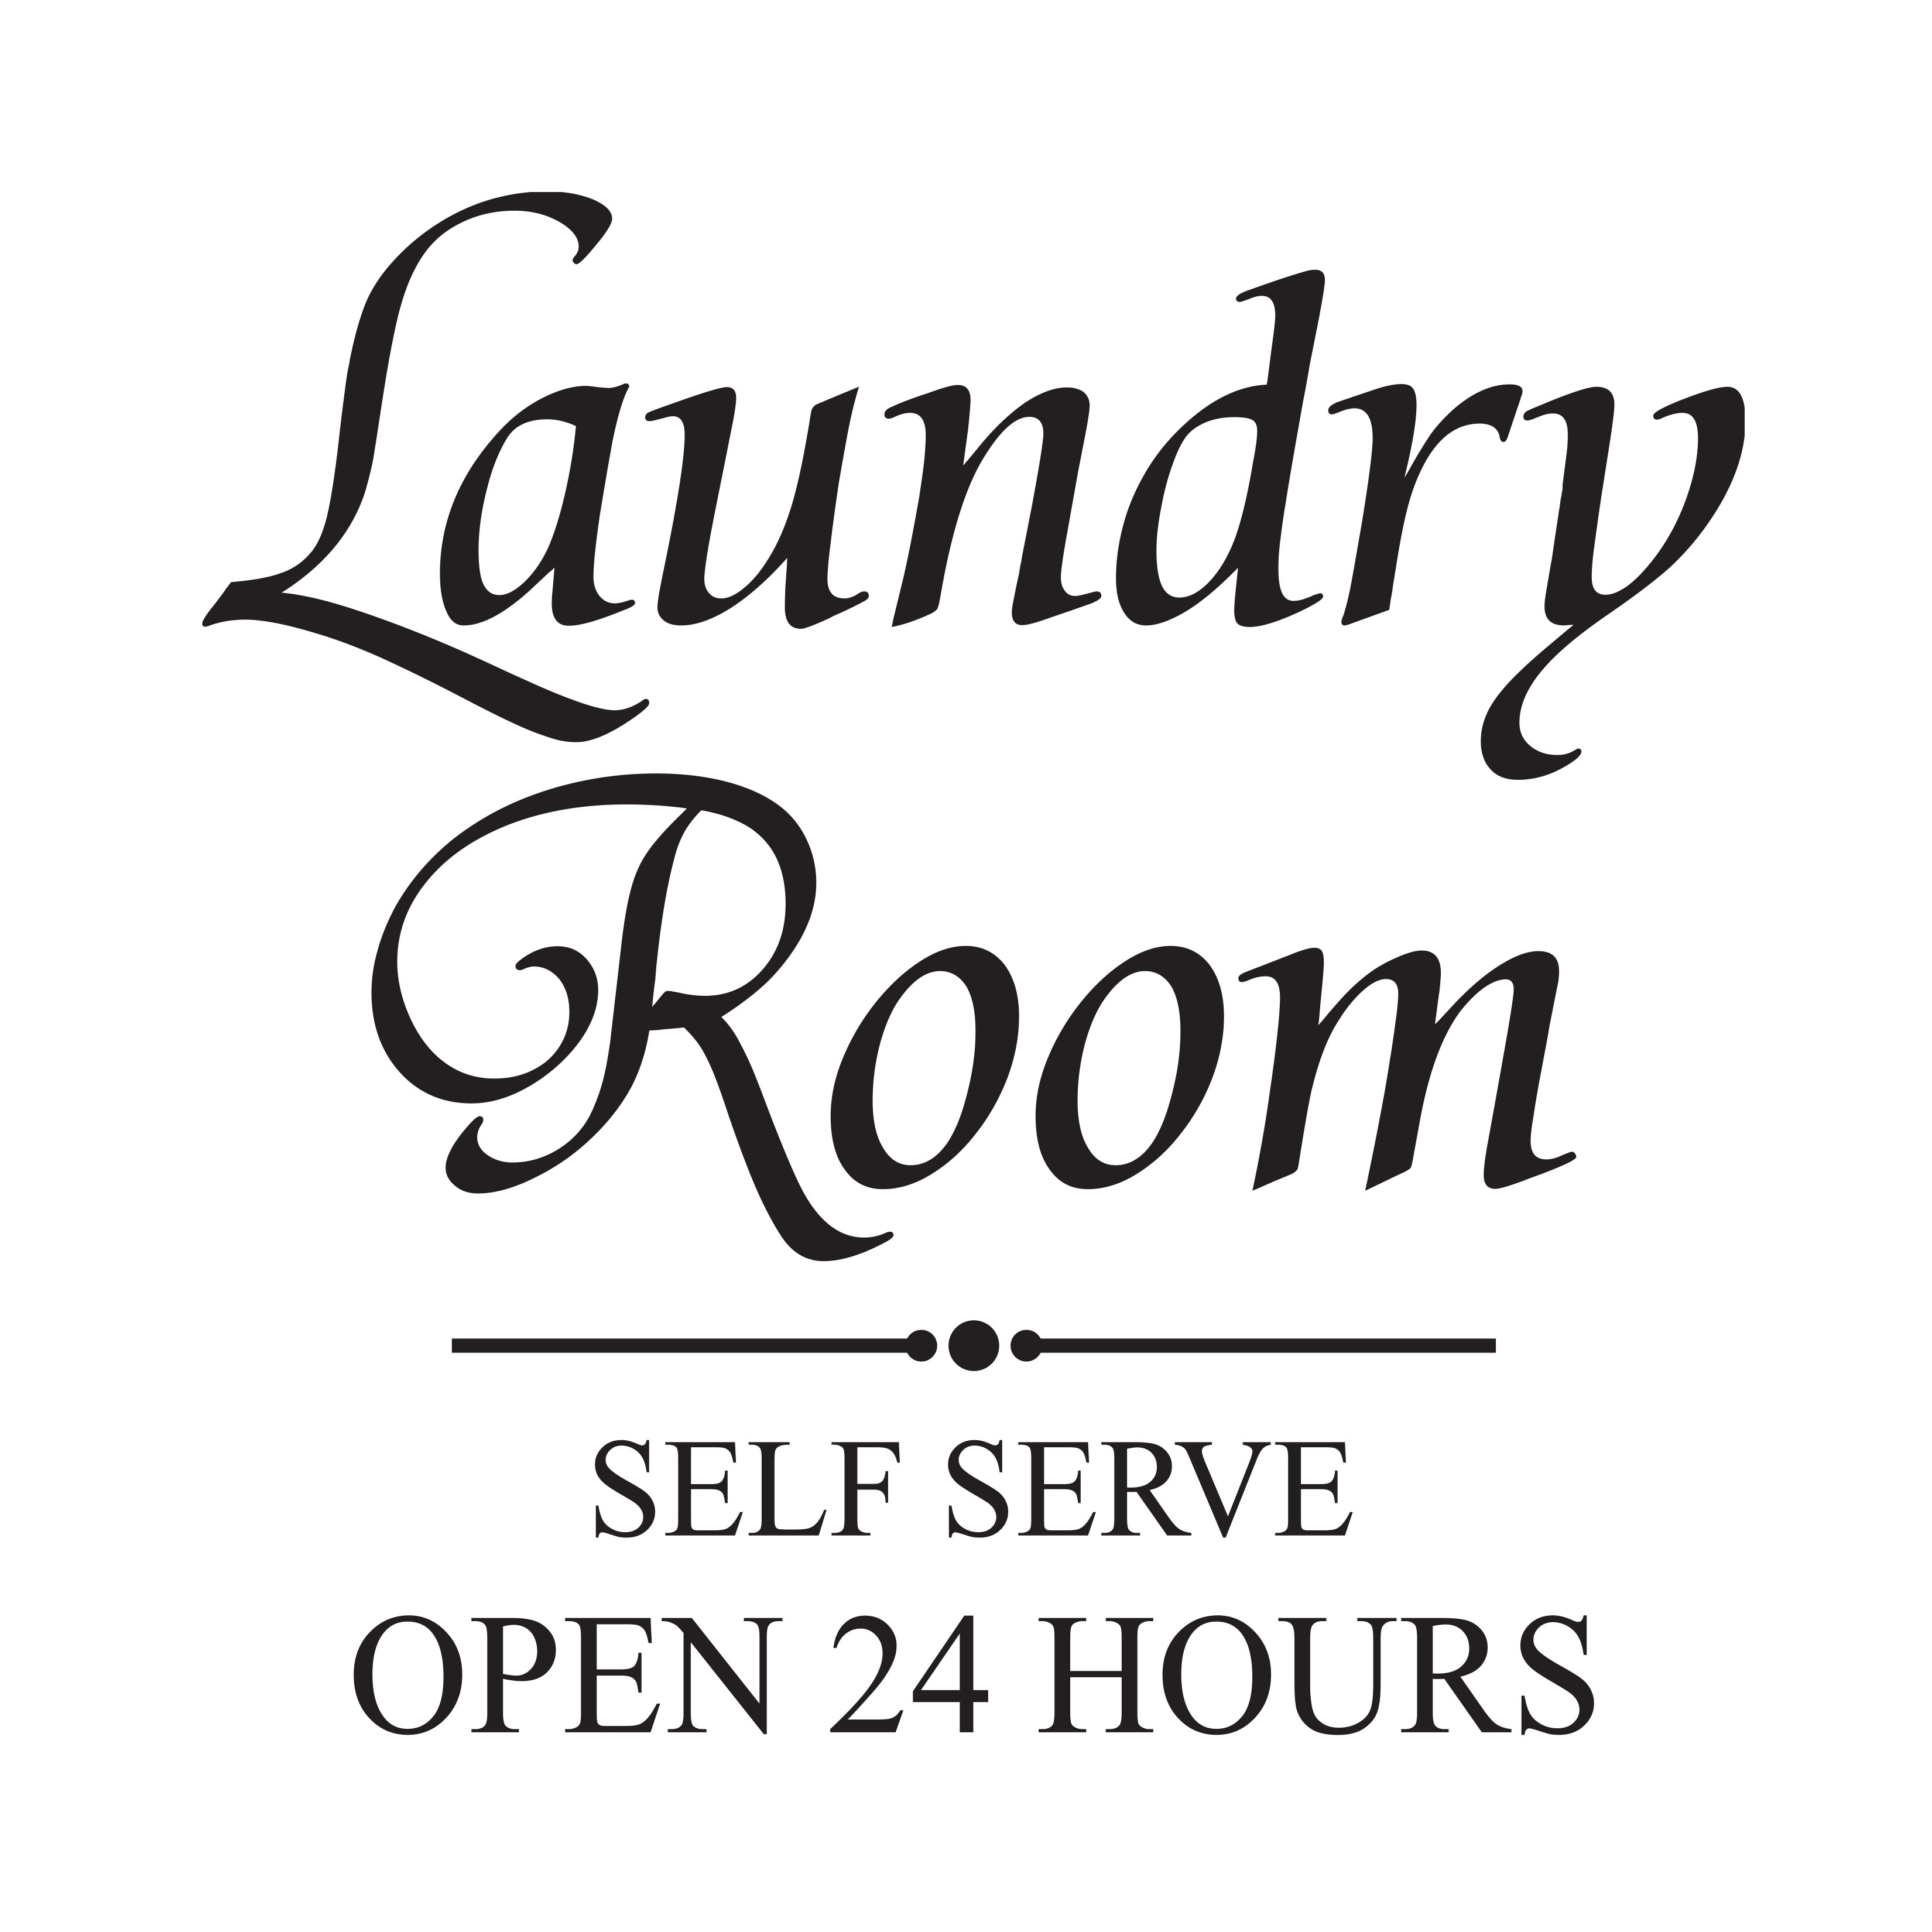 44 Colors Self Serve Laundry Open 24 Vinyl Decal Home Wall Free & Fast Shipping 